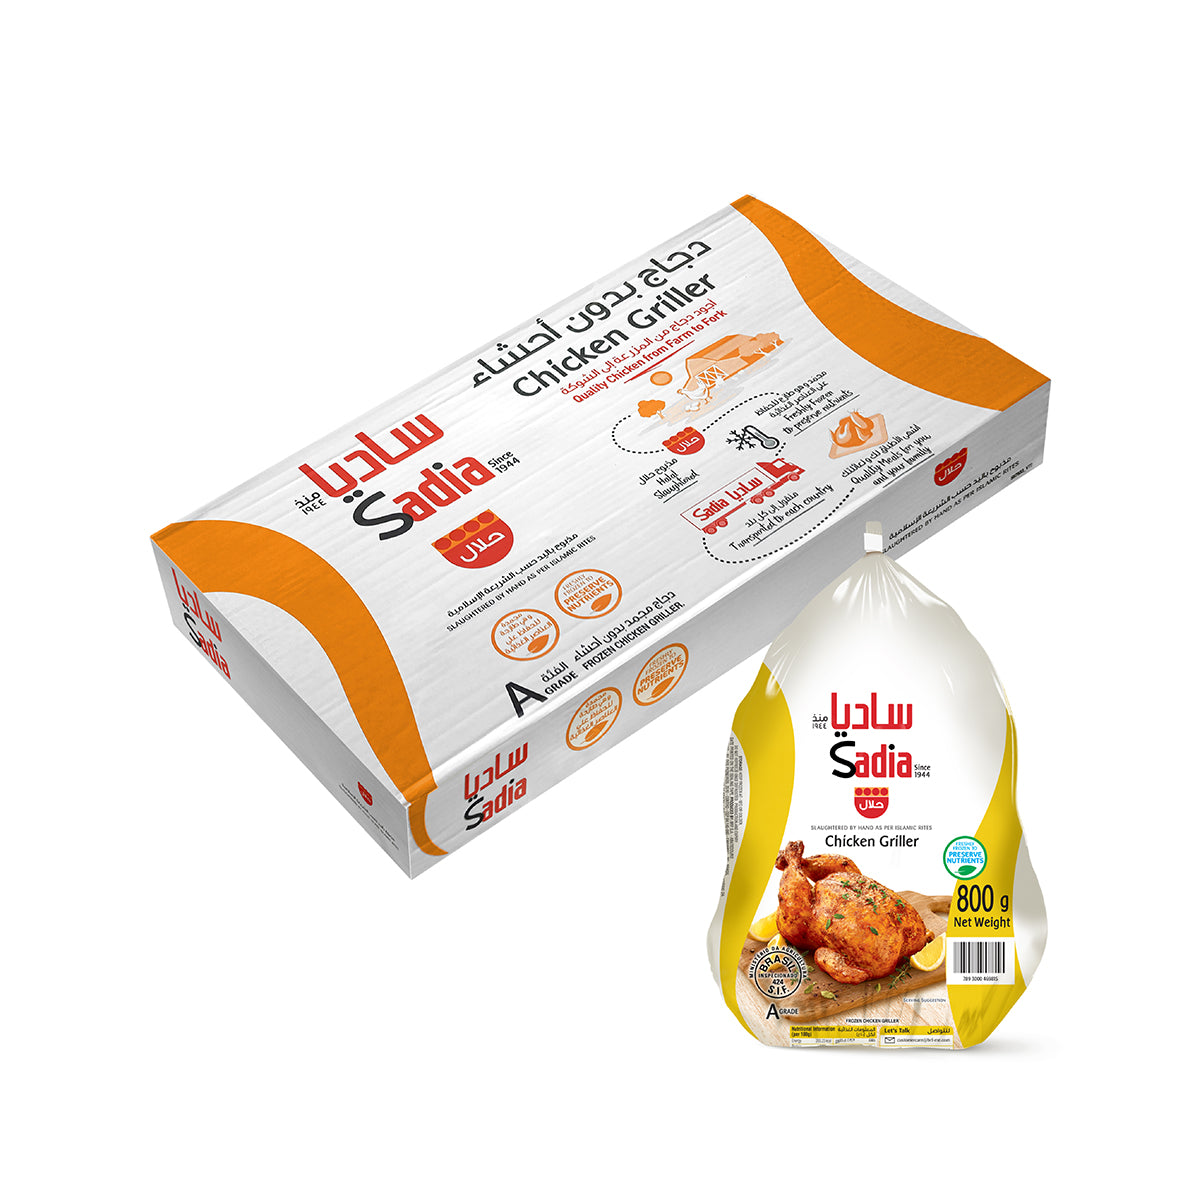 Whole Chicken Griller 800g - Sadia